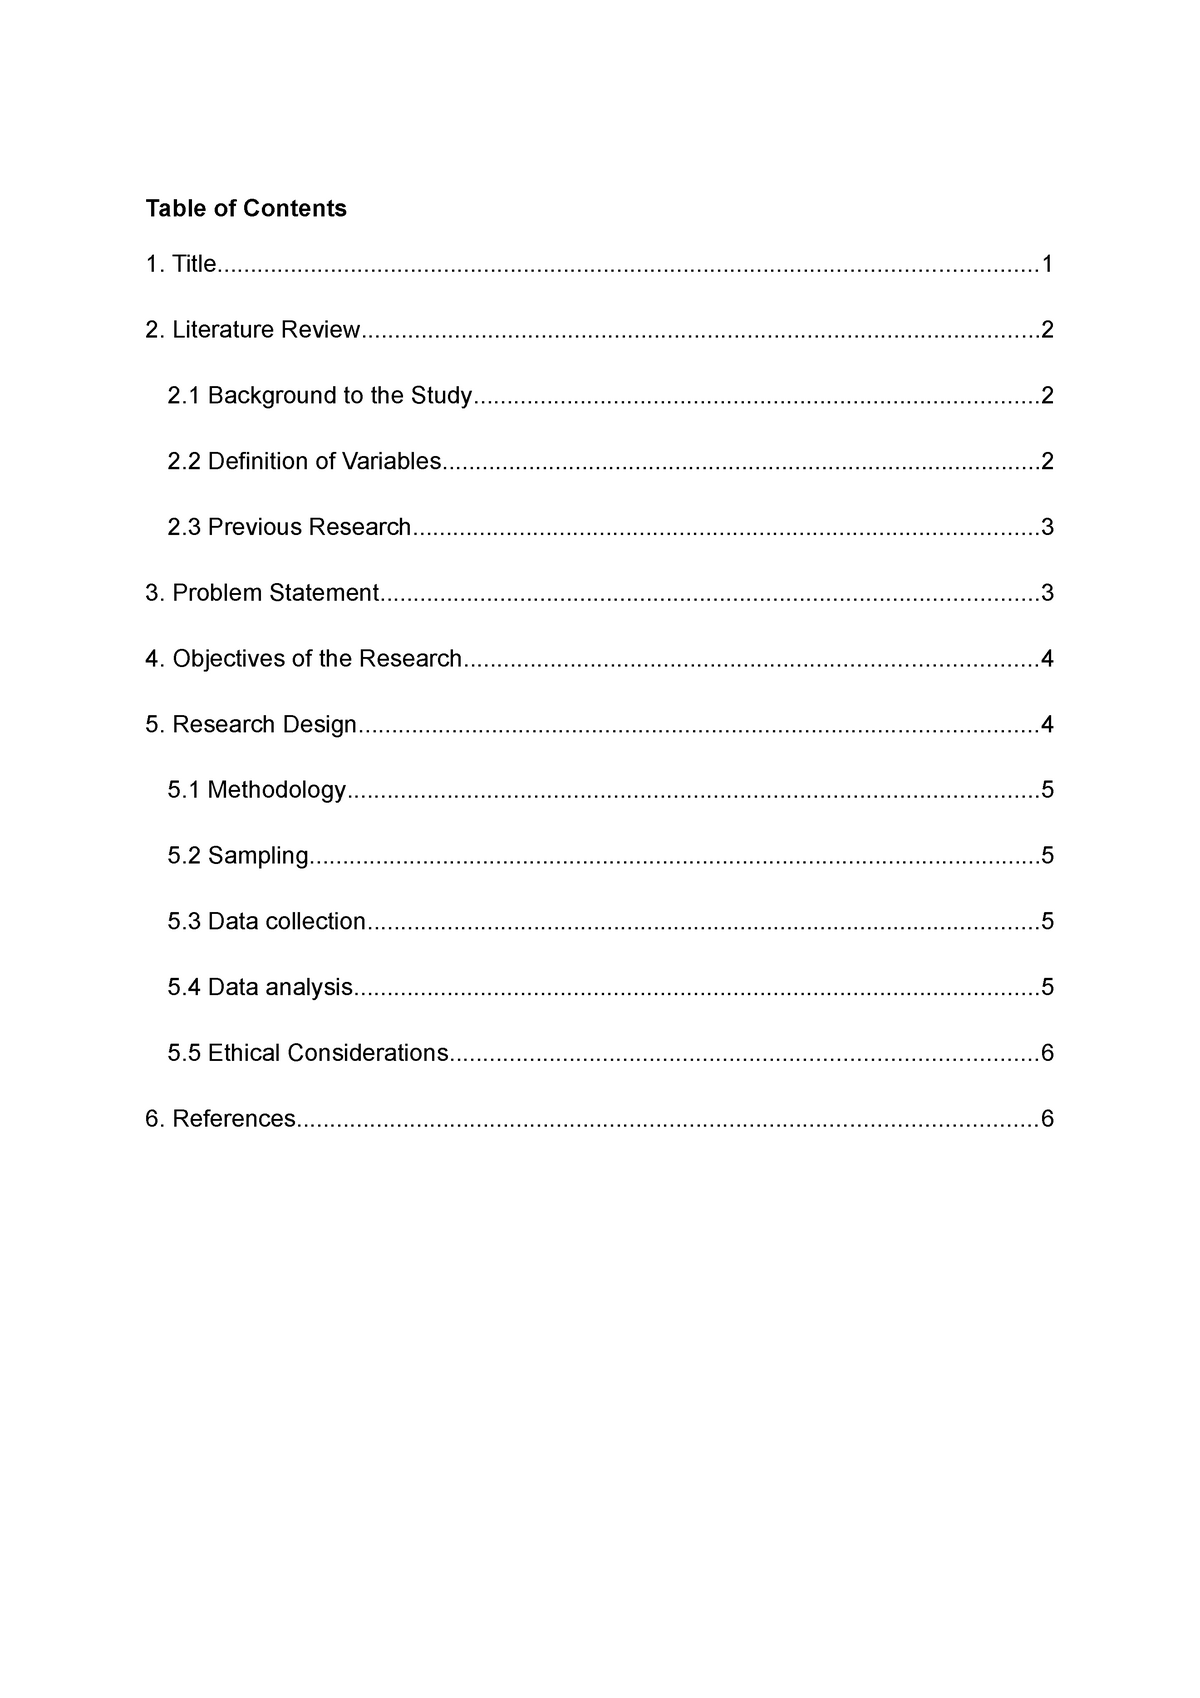 phd research proposal table of contents